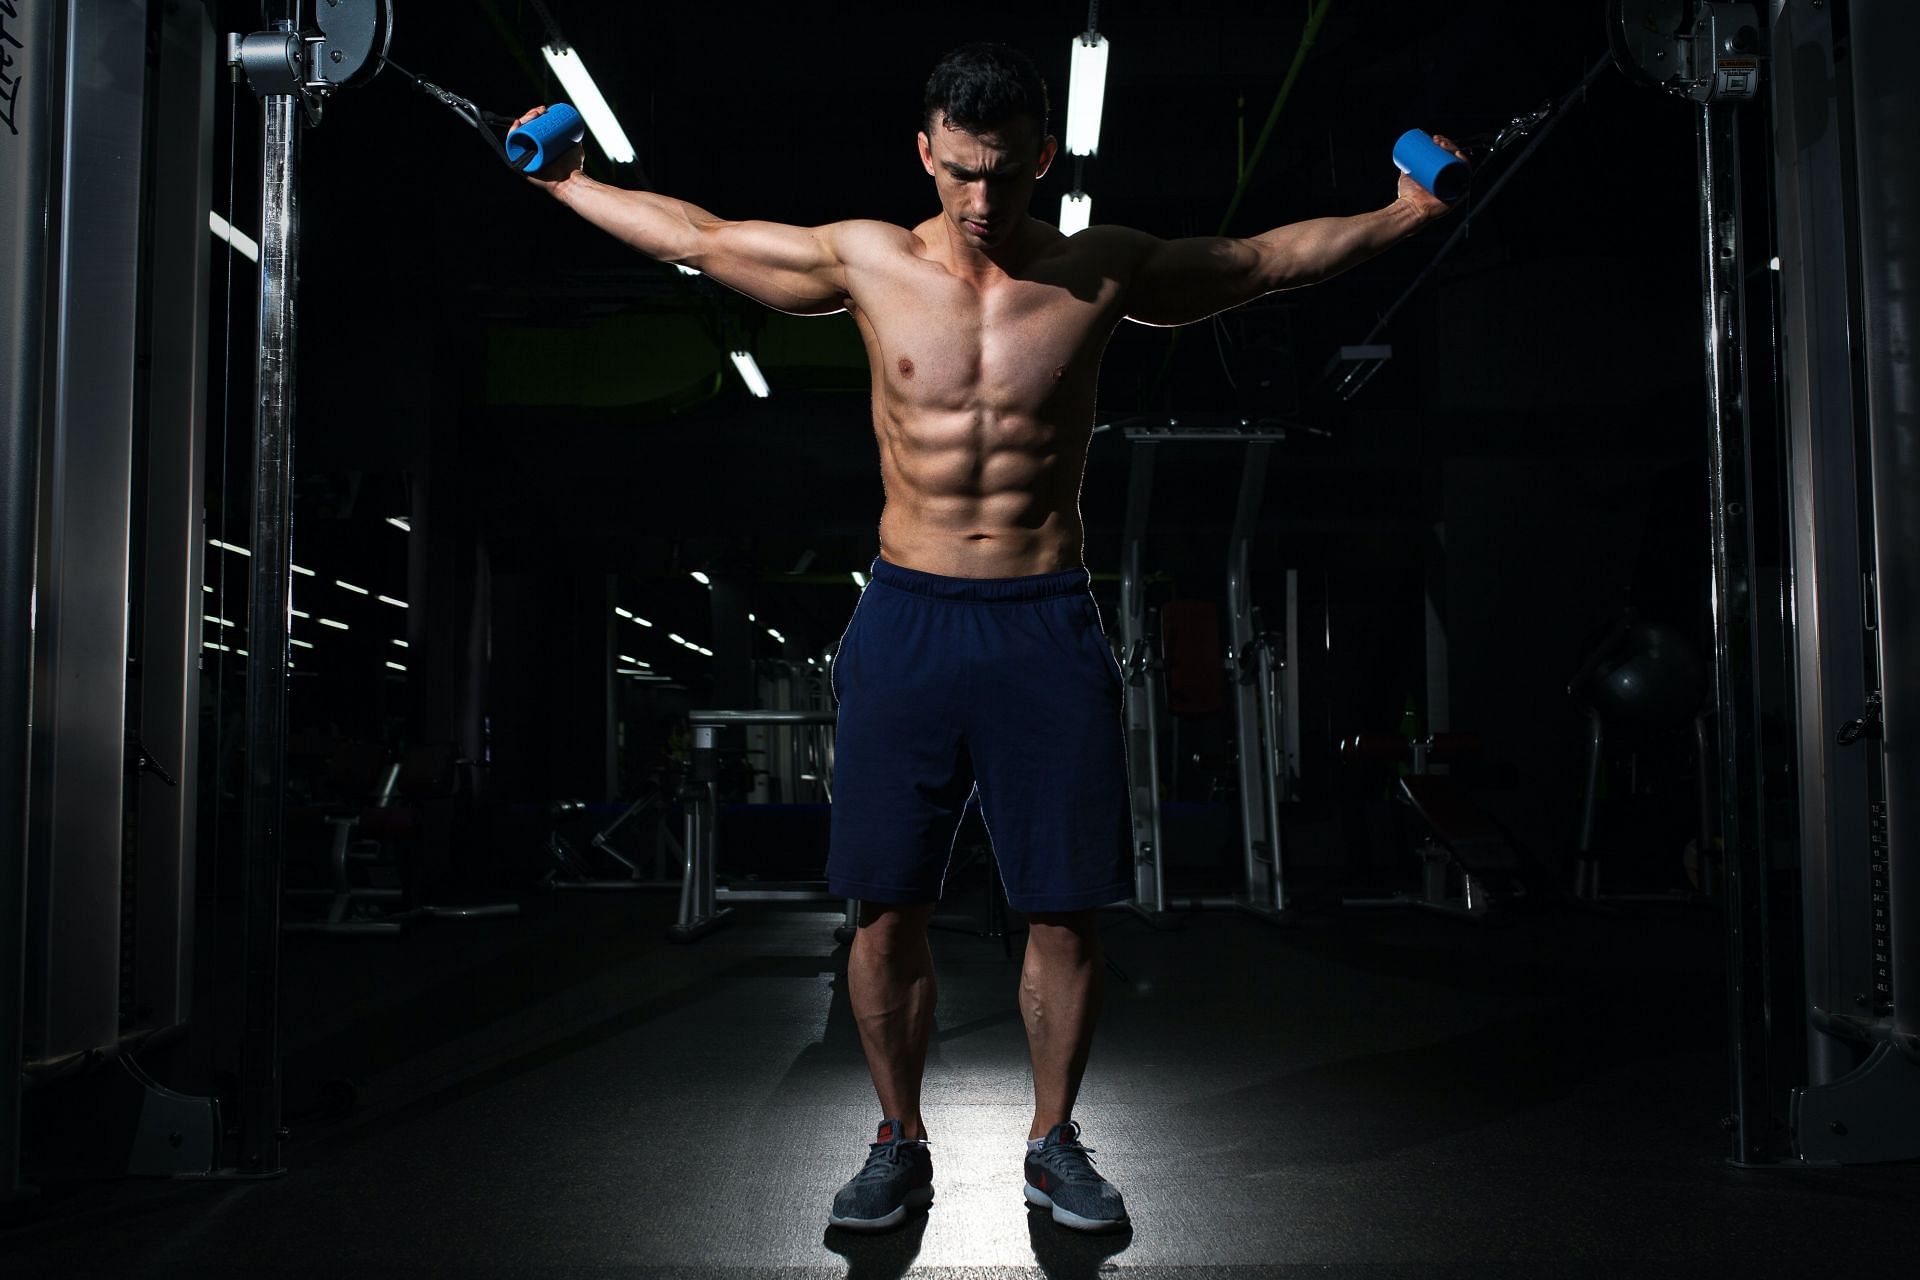 Best lower chest exercises that you can do with cables. (Image via Unsplash/Valery Sysoev)